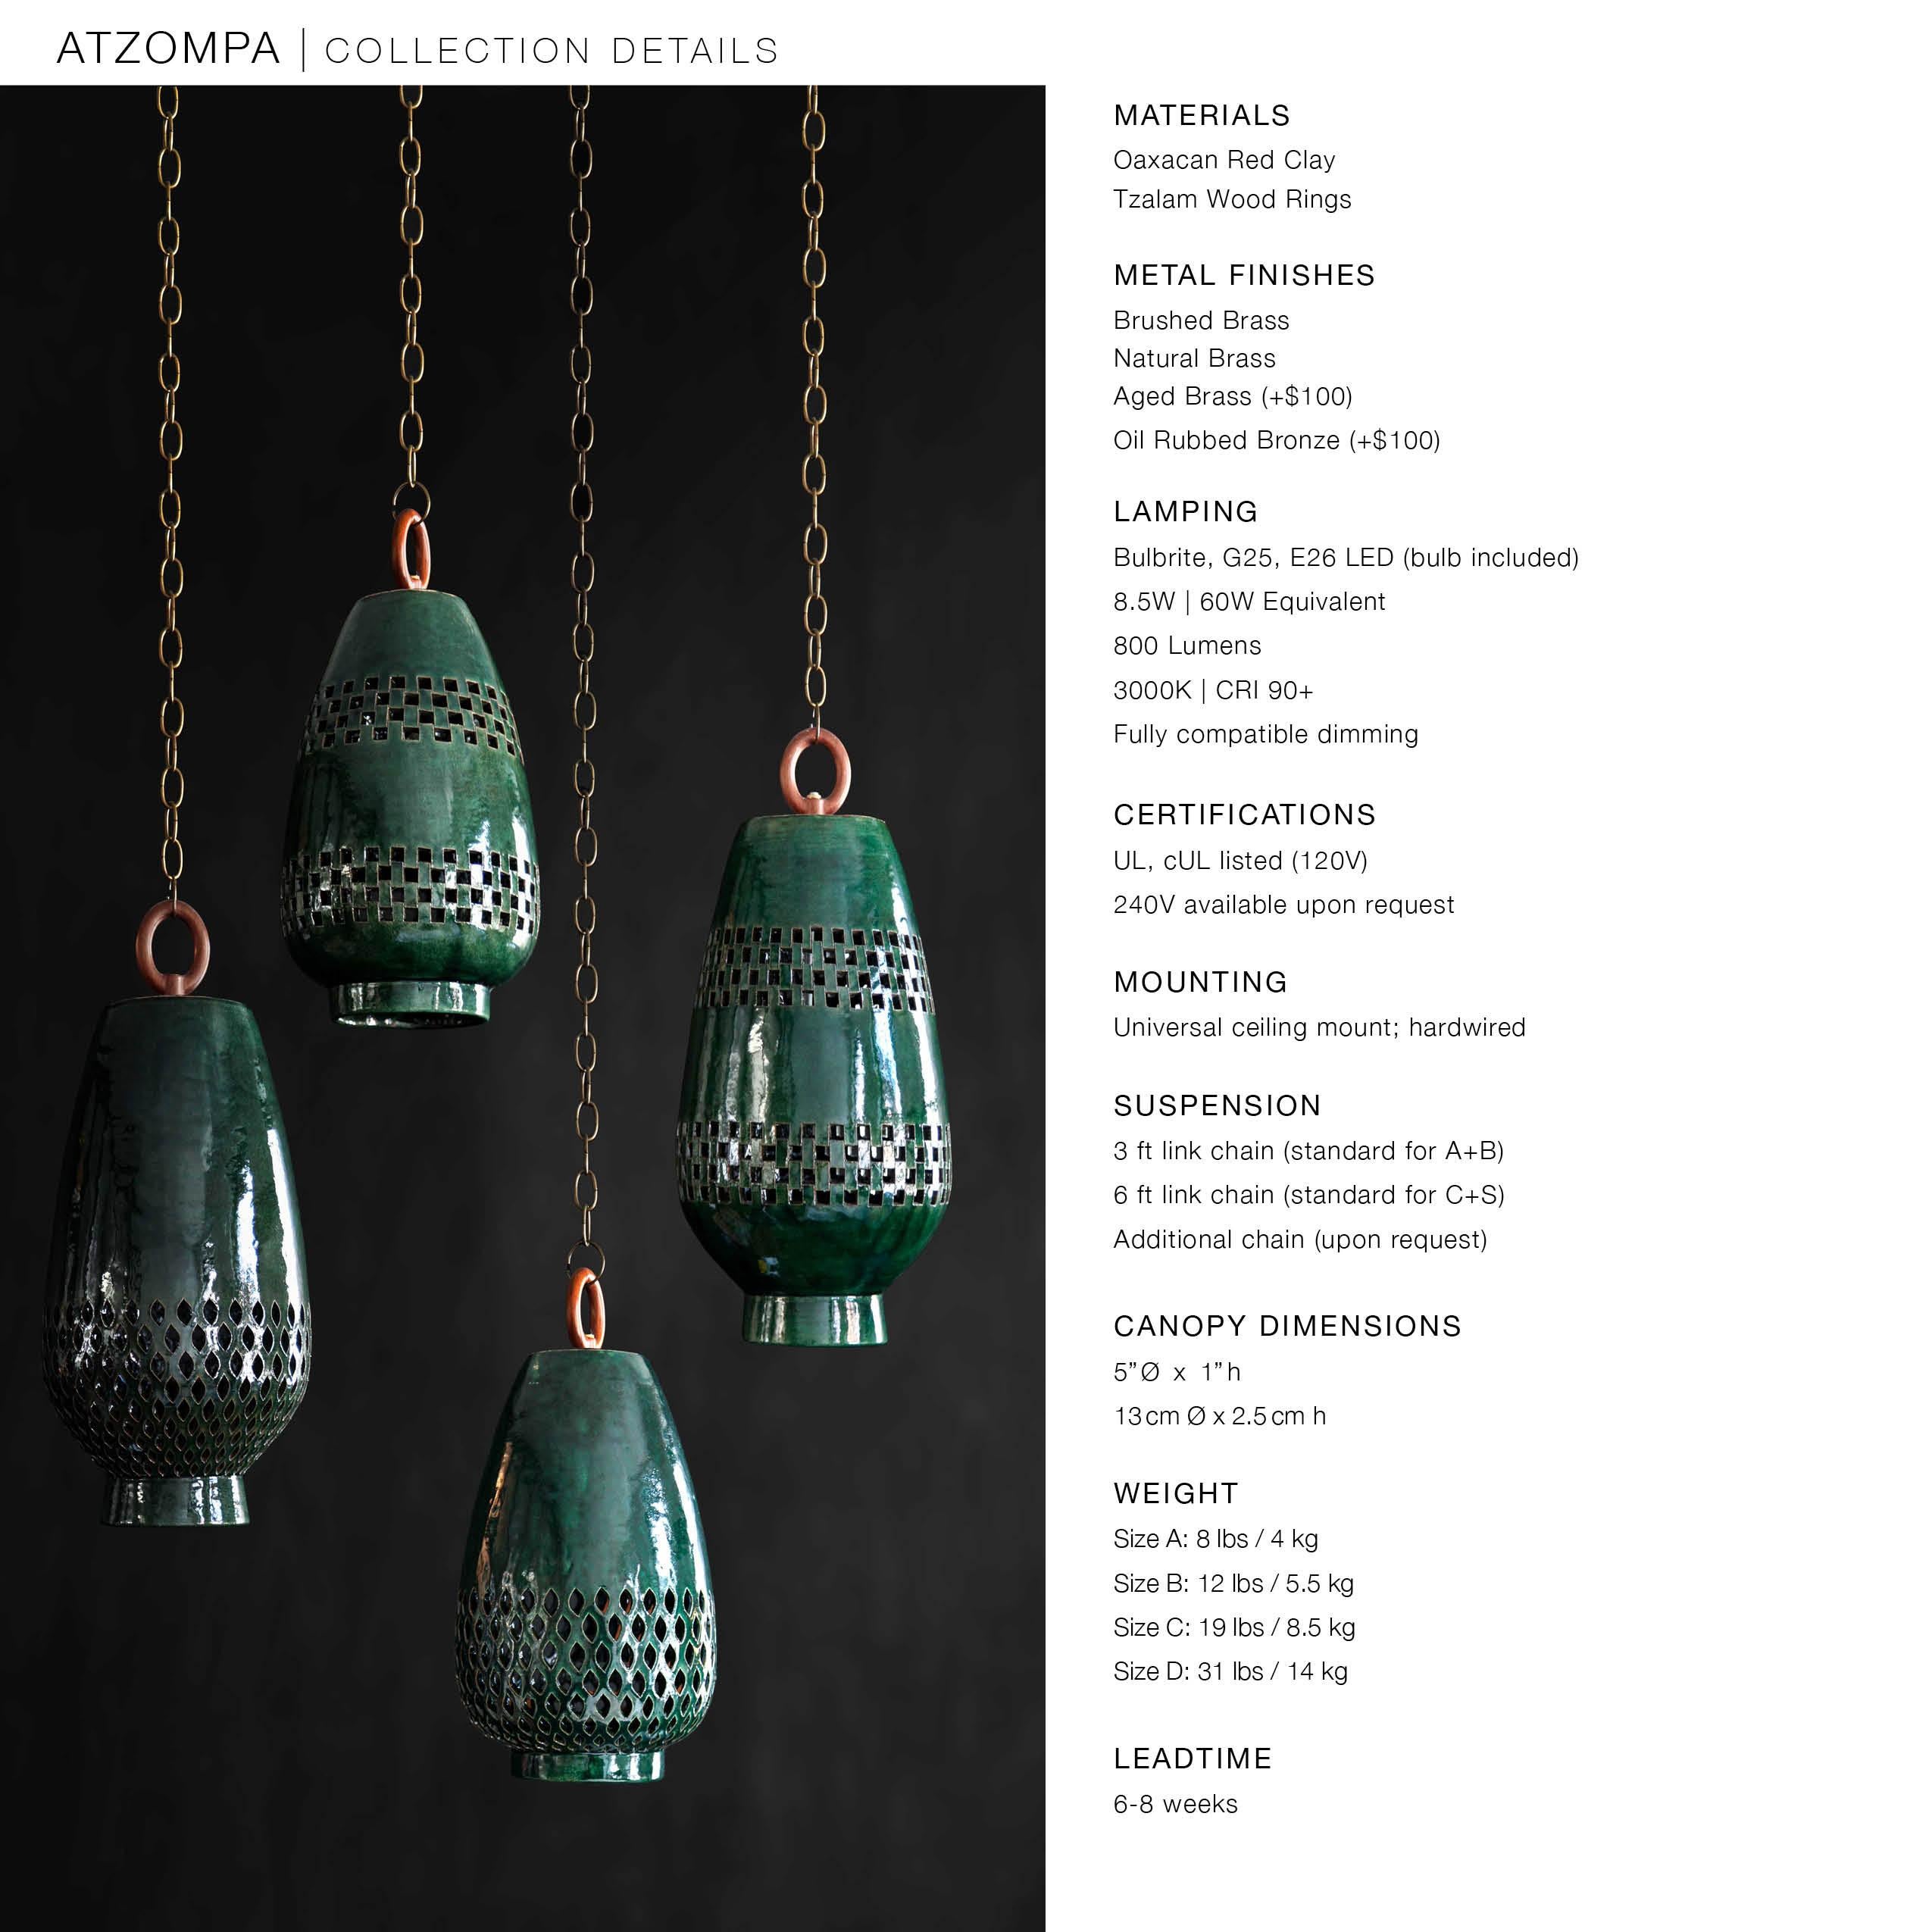 Hand-Crafted Large Emerald Ceramic Pendant Light, Aged Brass, Ajedrez Atzompa Collection For Sale